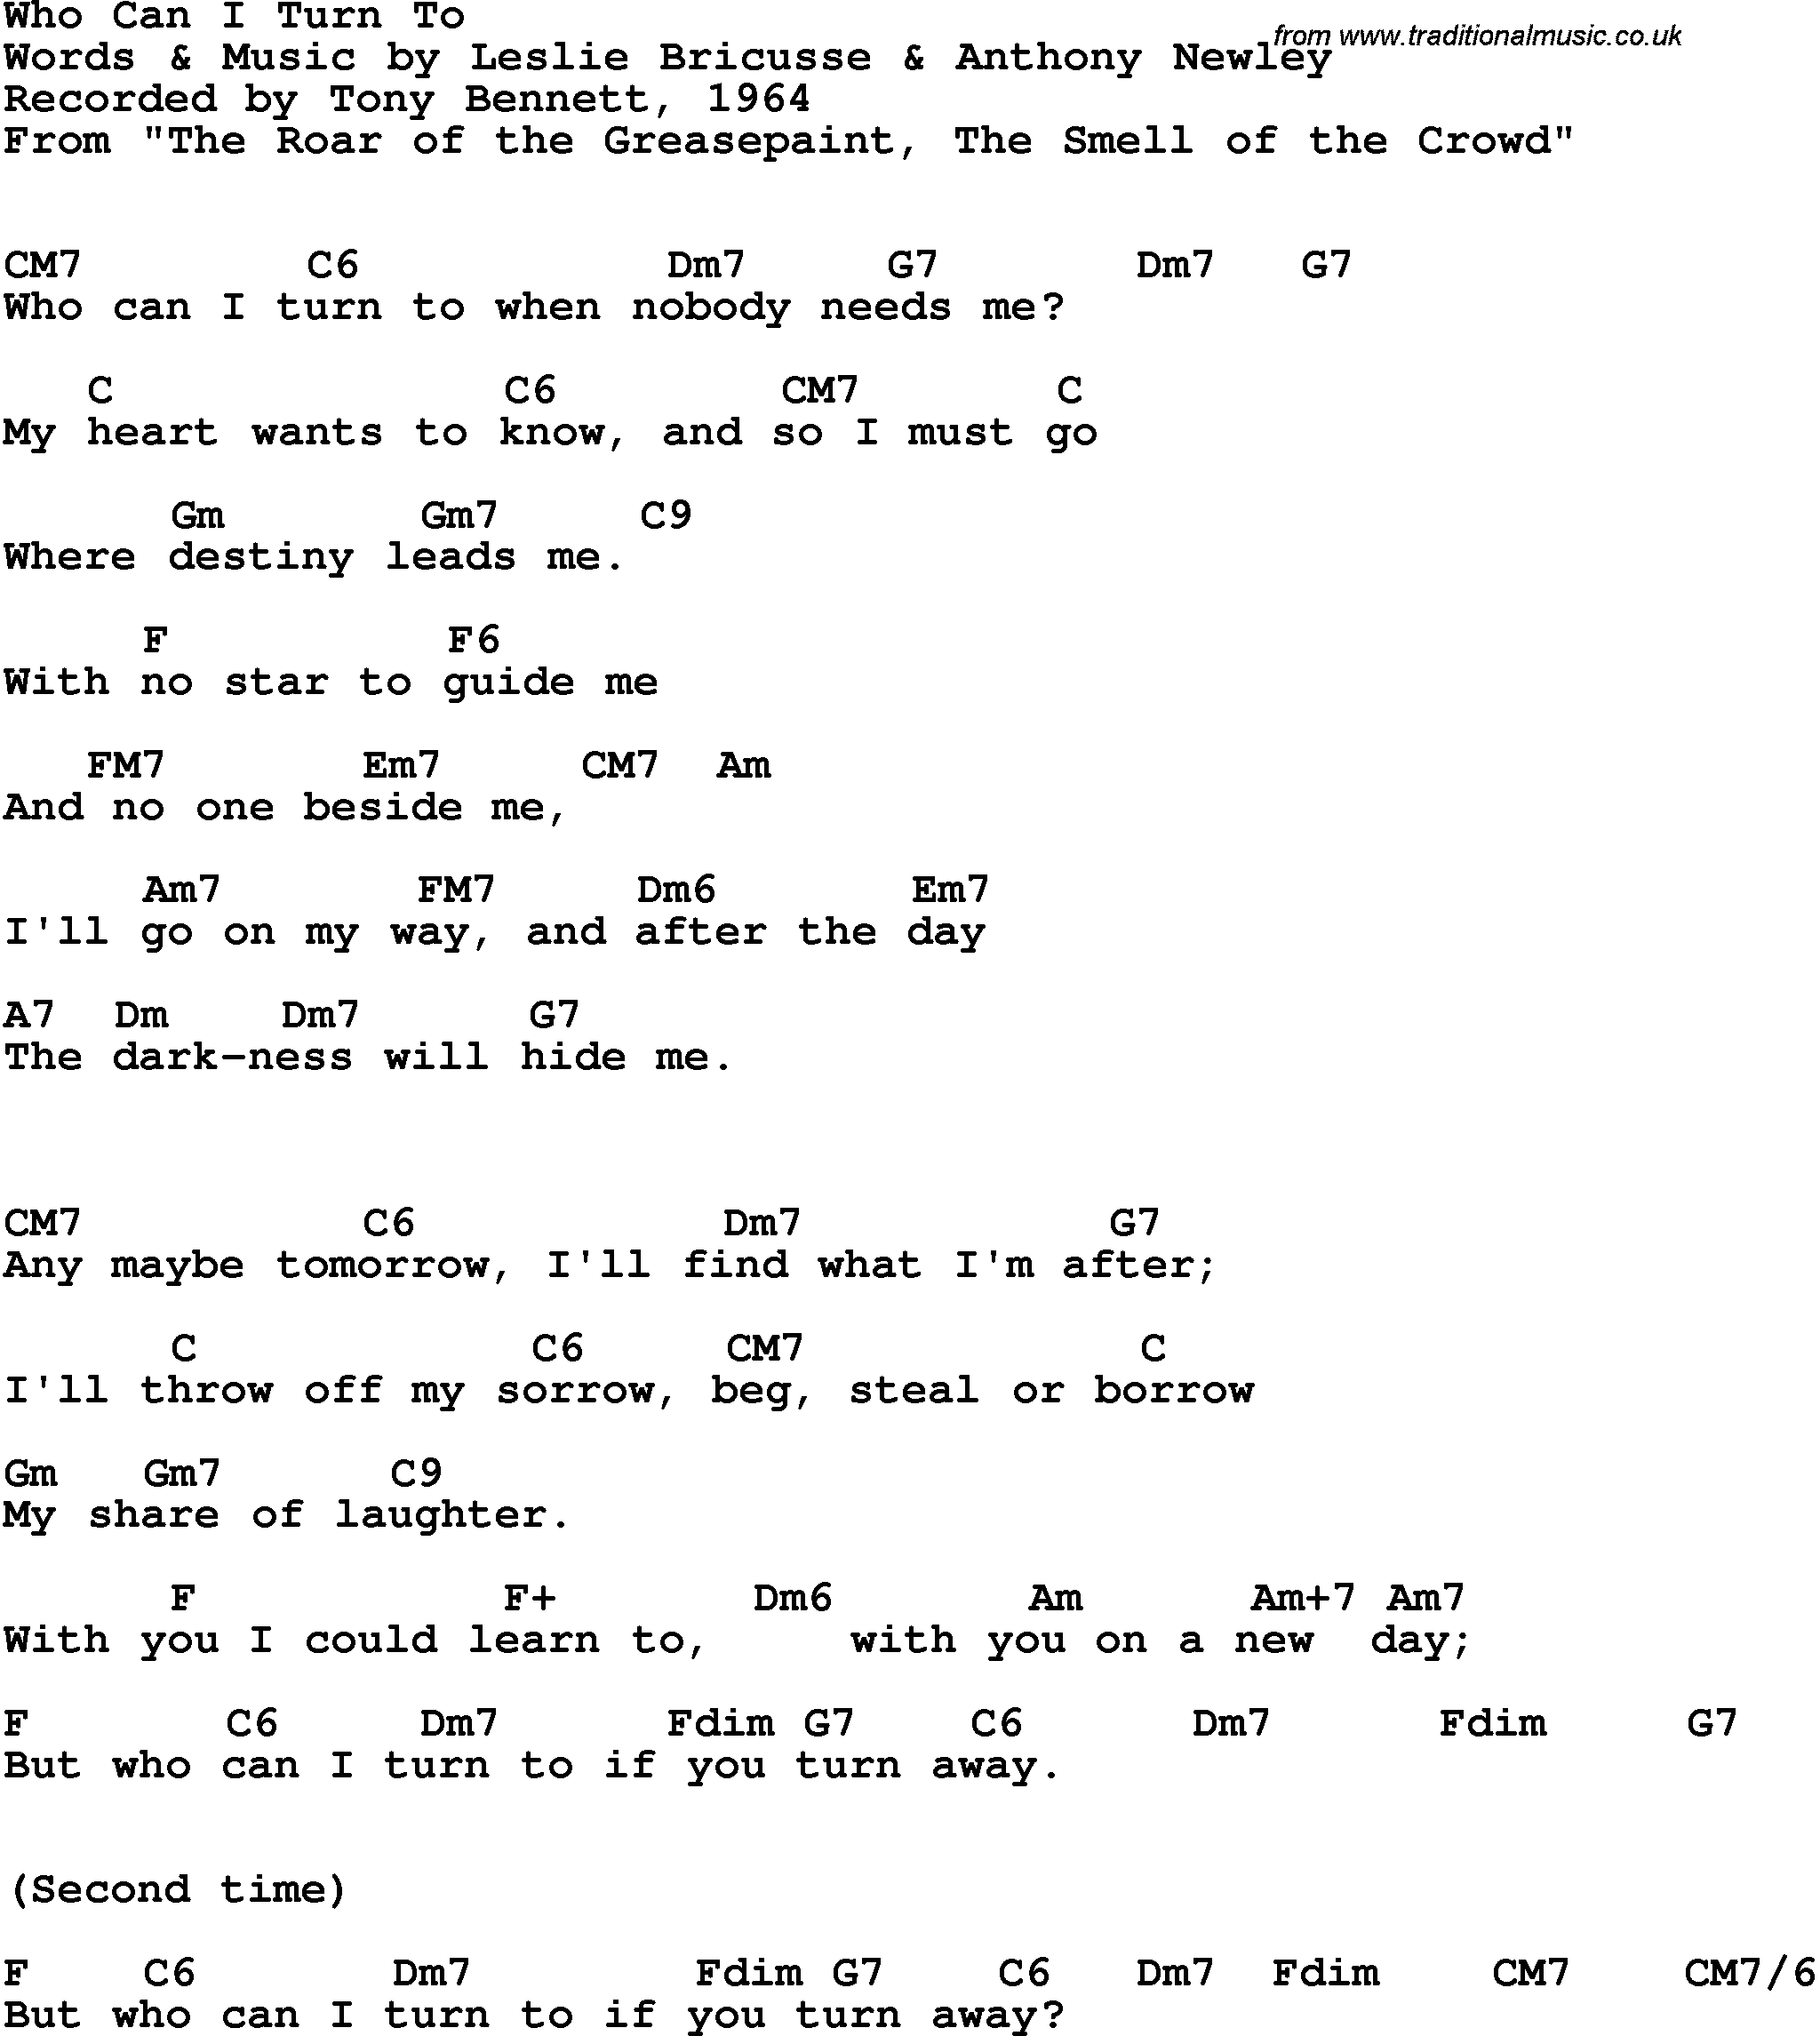 Song Lyrics with guitar chords for Who Can I Turn To - Tony Bennett, 1964